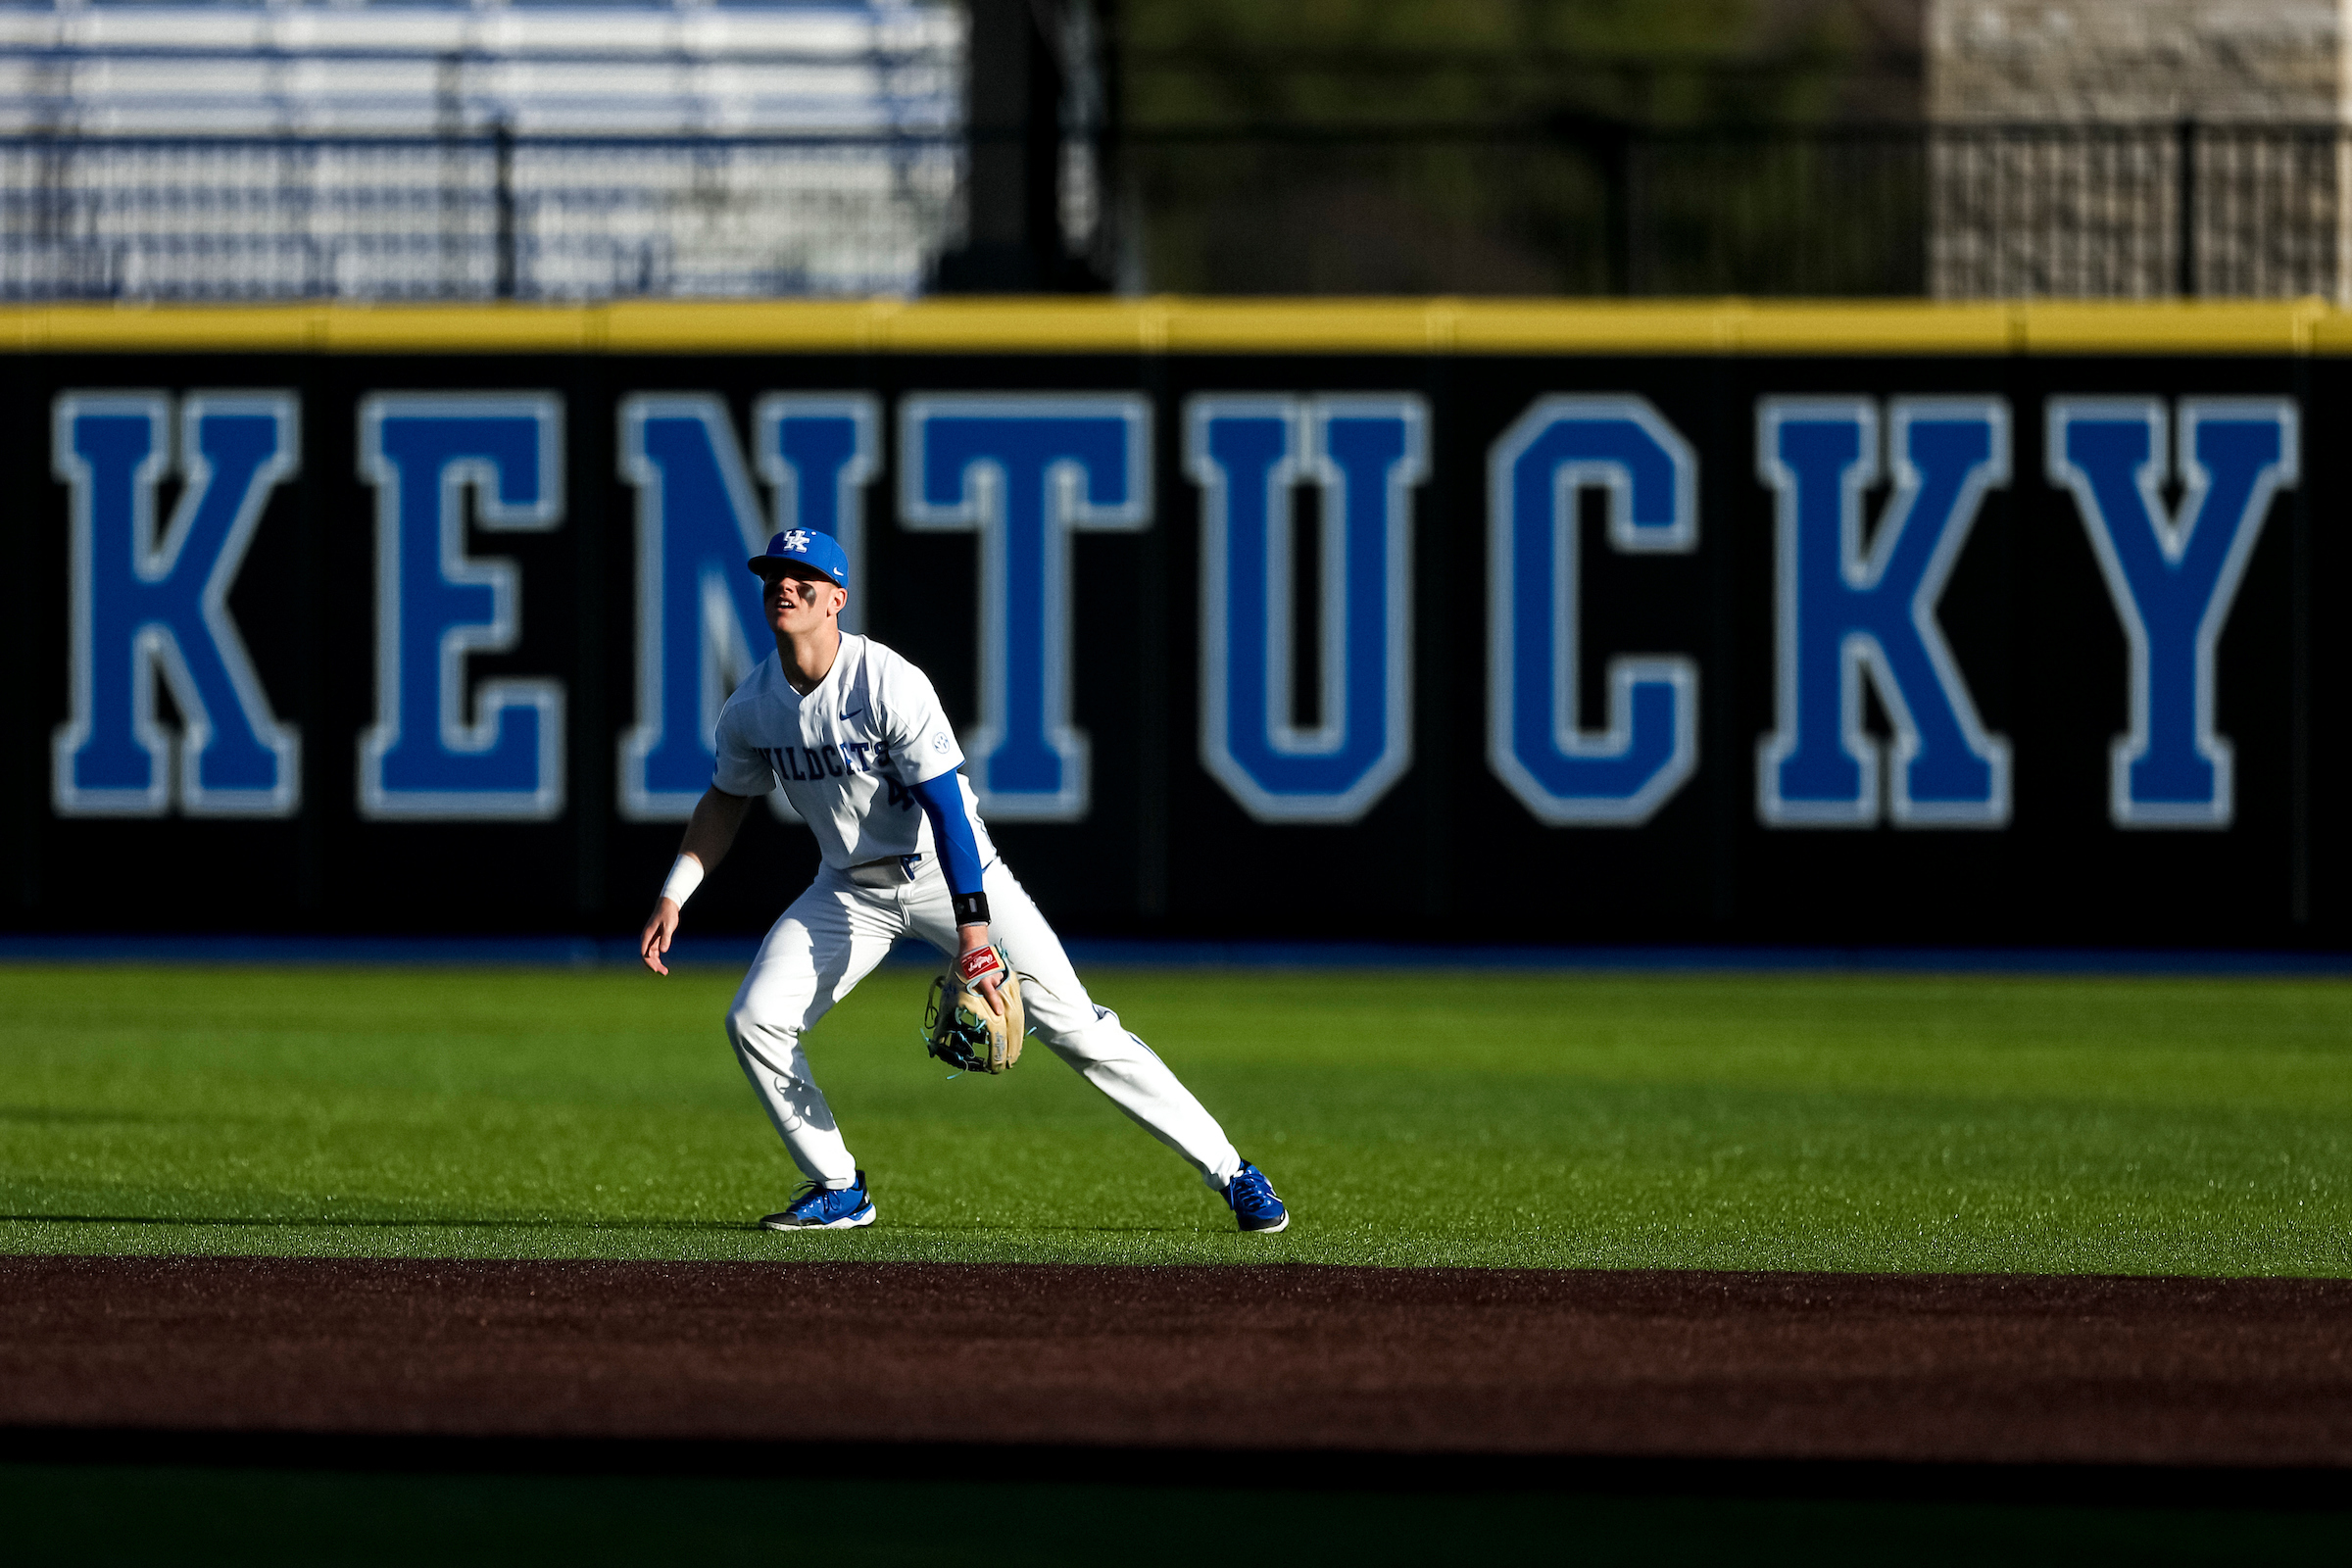 Kentucky Seeks to Continue Stifling Pitching This Weekend